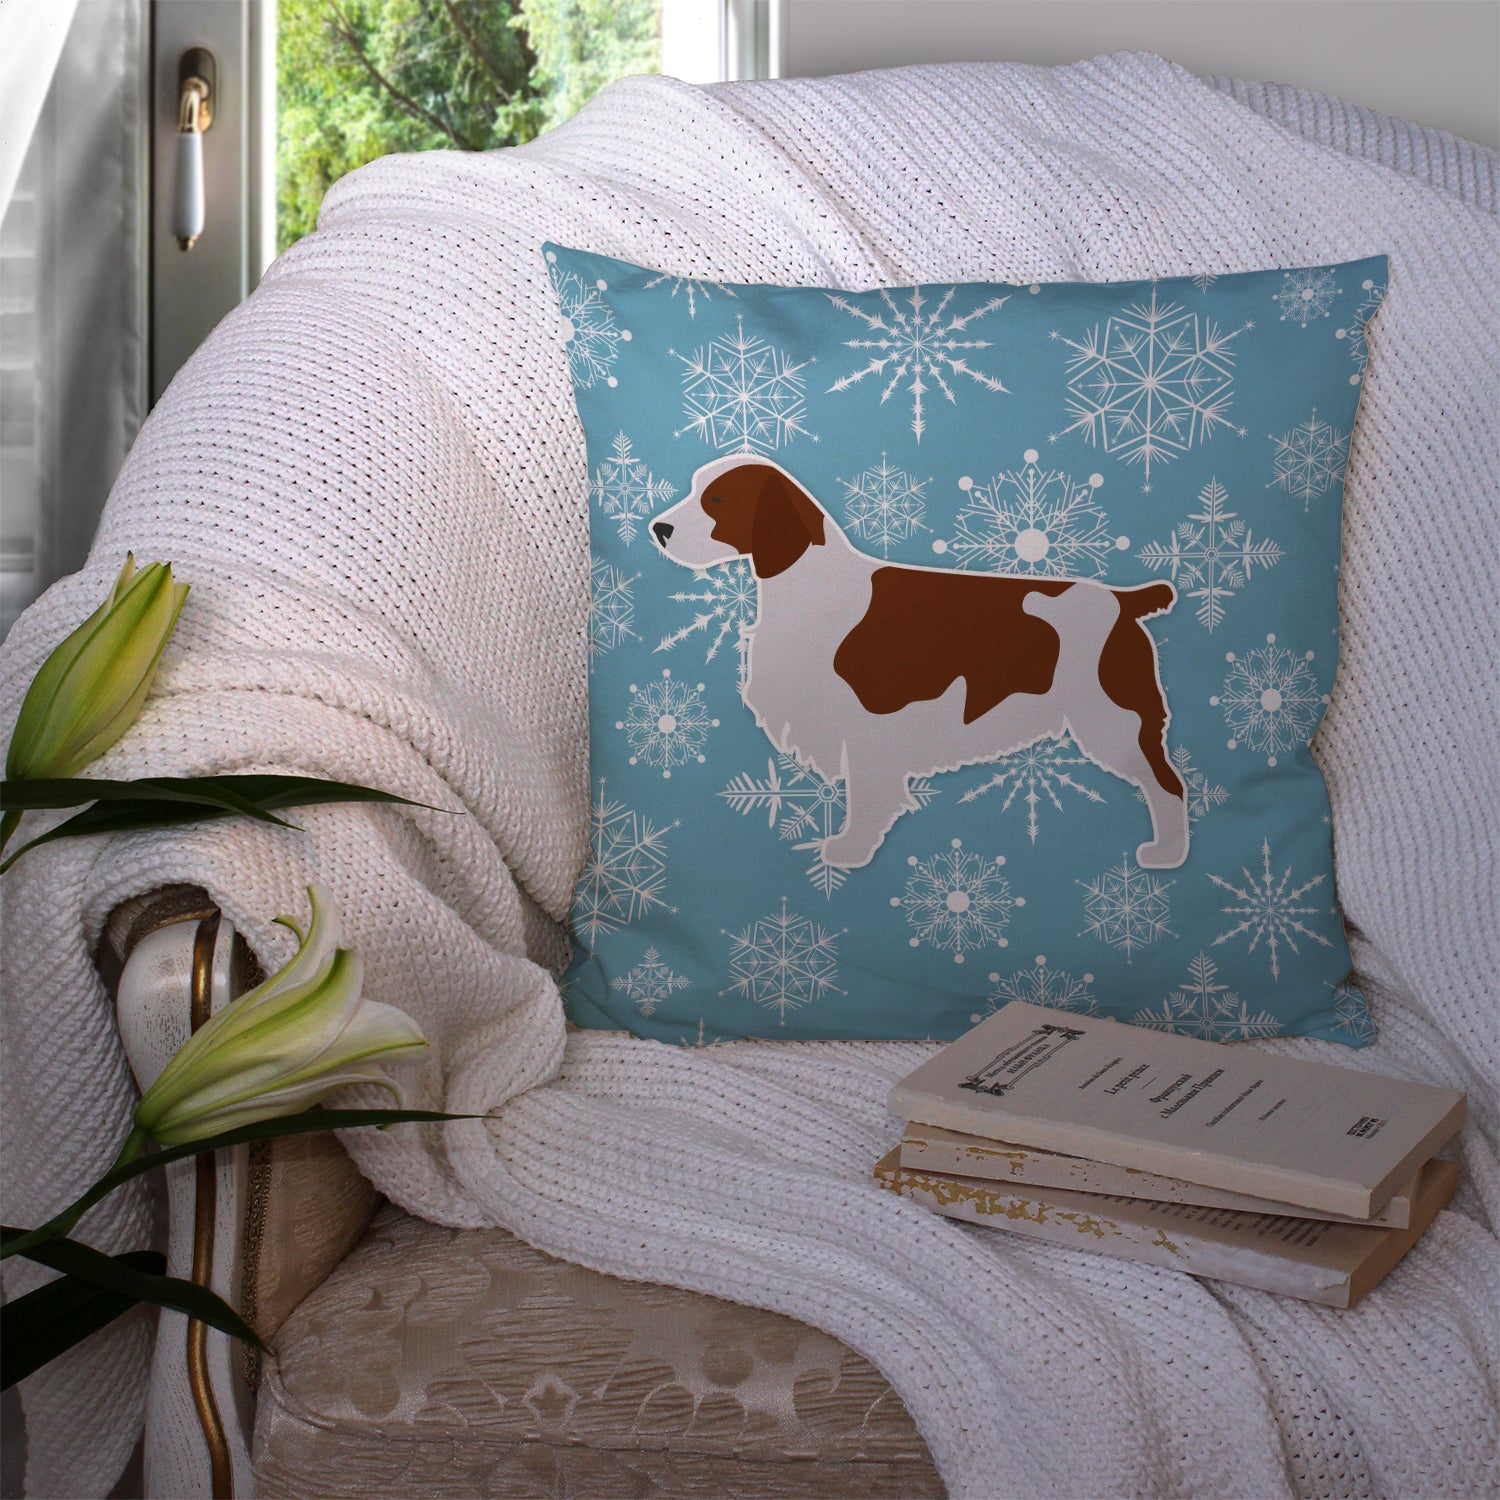 Winter Snowflake Welsh Springer Spaniel Fabric Decorative Pillow BB3500PW1414 - the-store.com